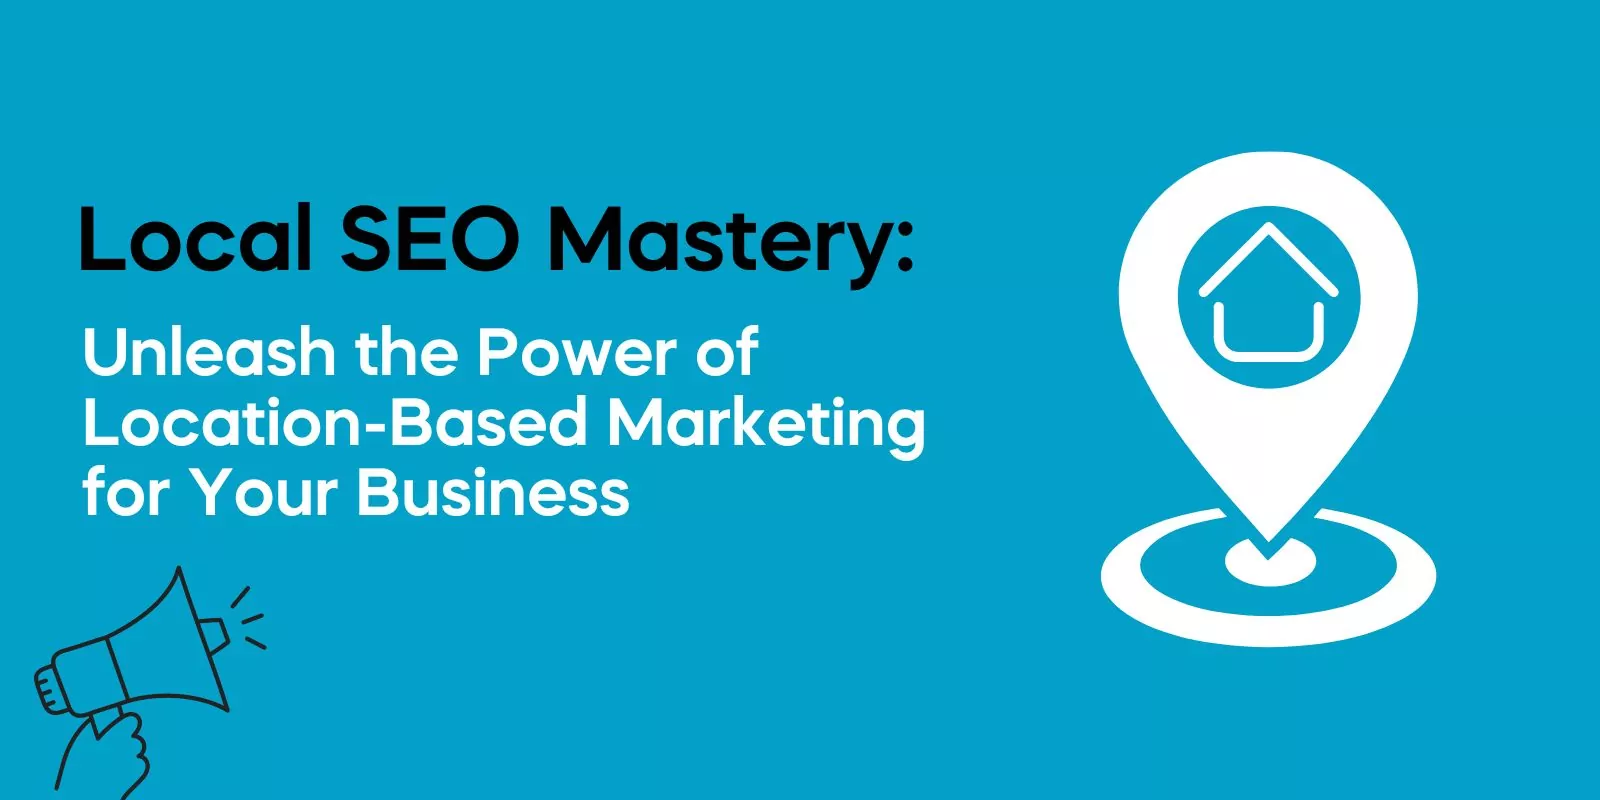 Local SEO Mastery: Unleash the Power of Location-Based Marketing for Your Business